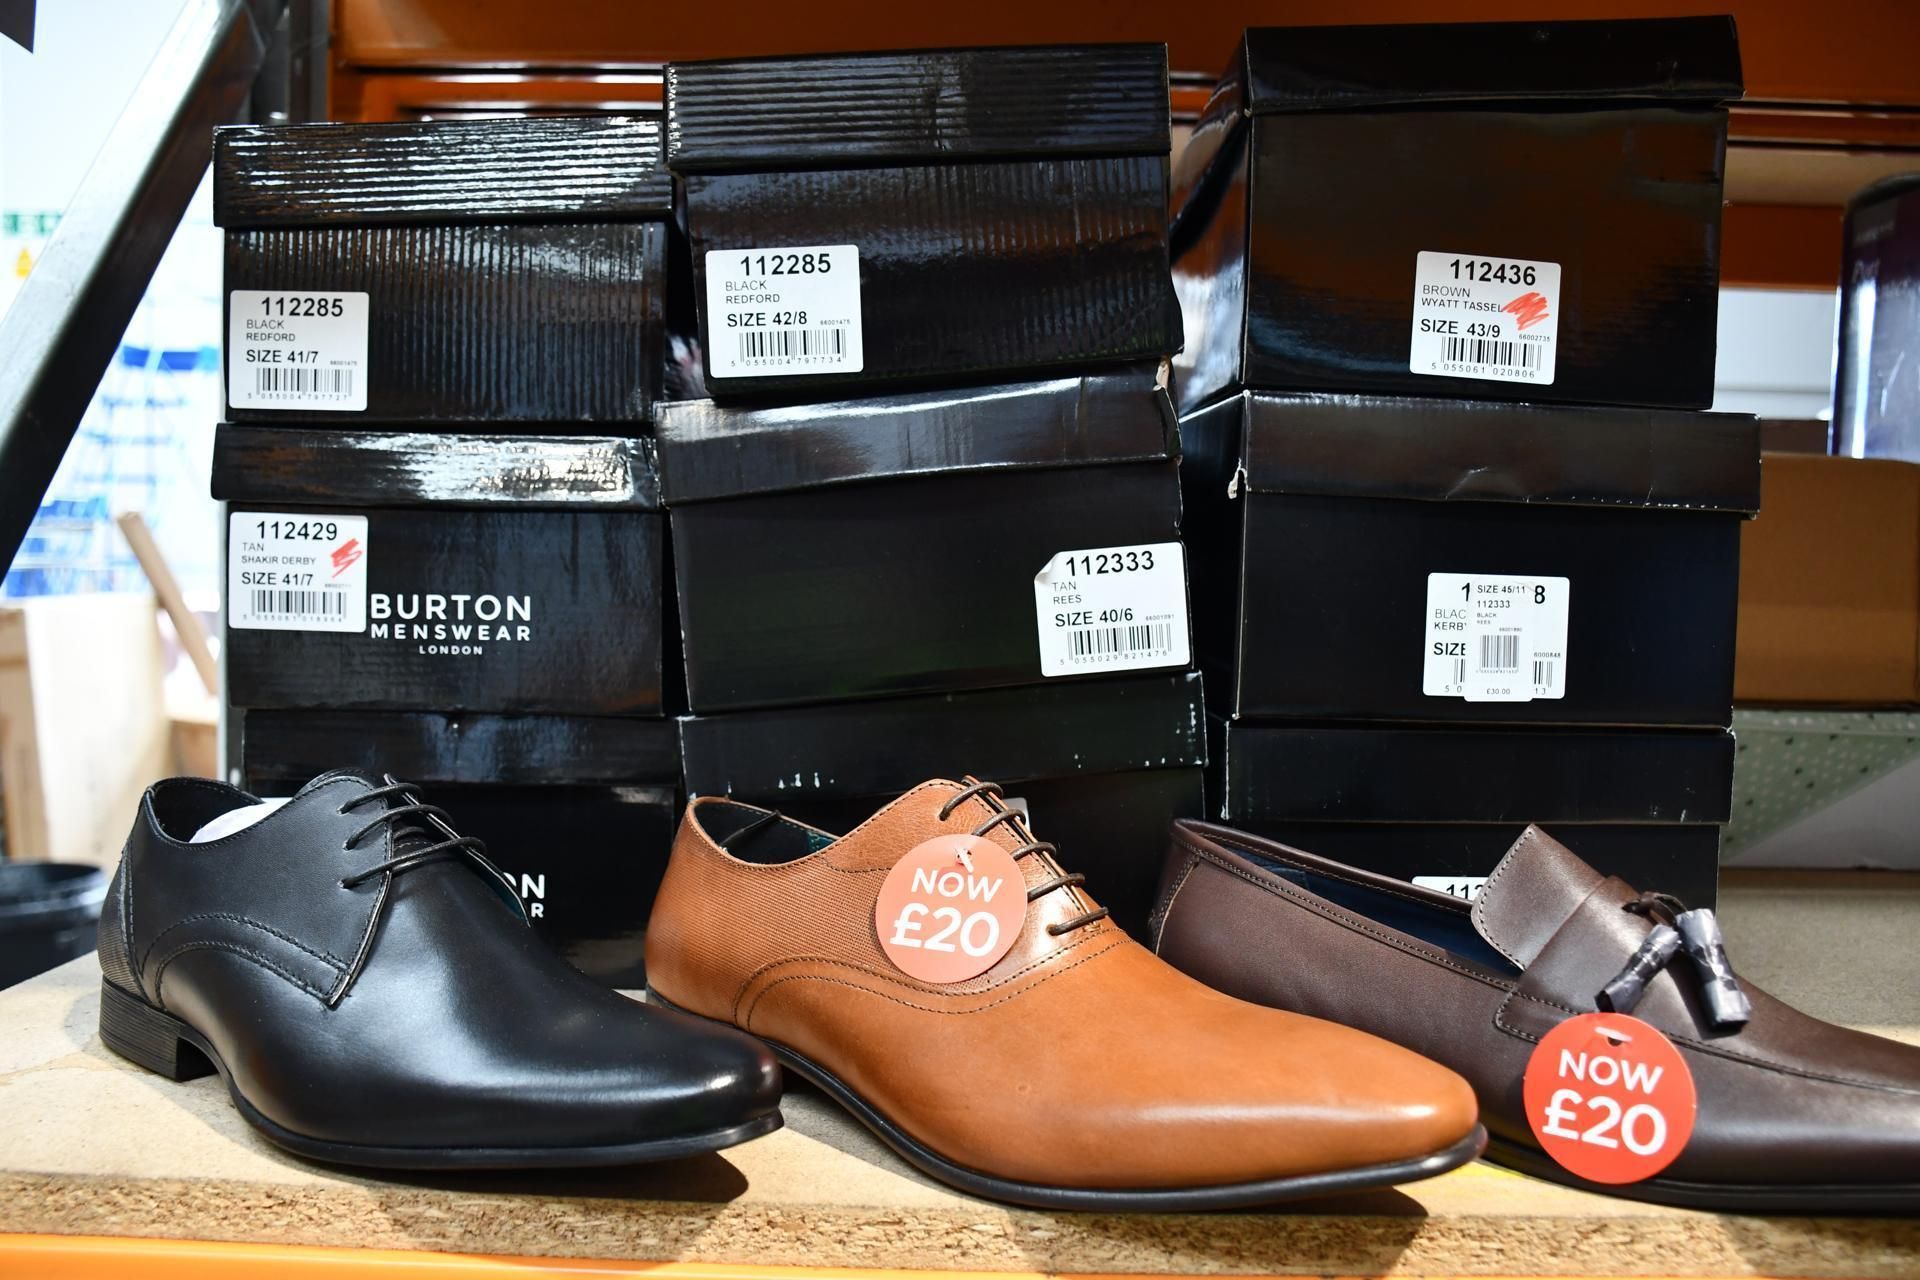 Nine Burton Menswear London Shoes, Mixed Styles and Sizes. Viewing Advised